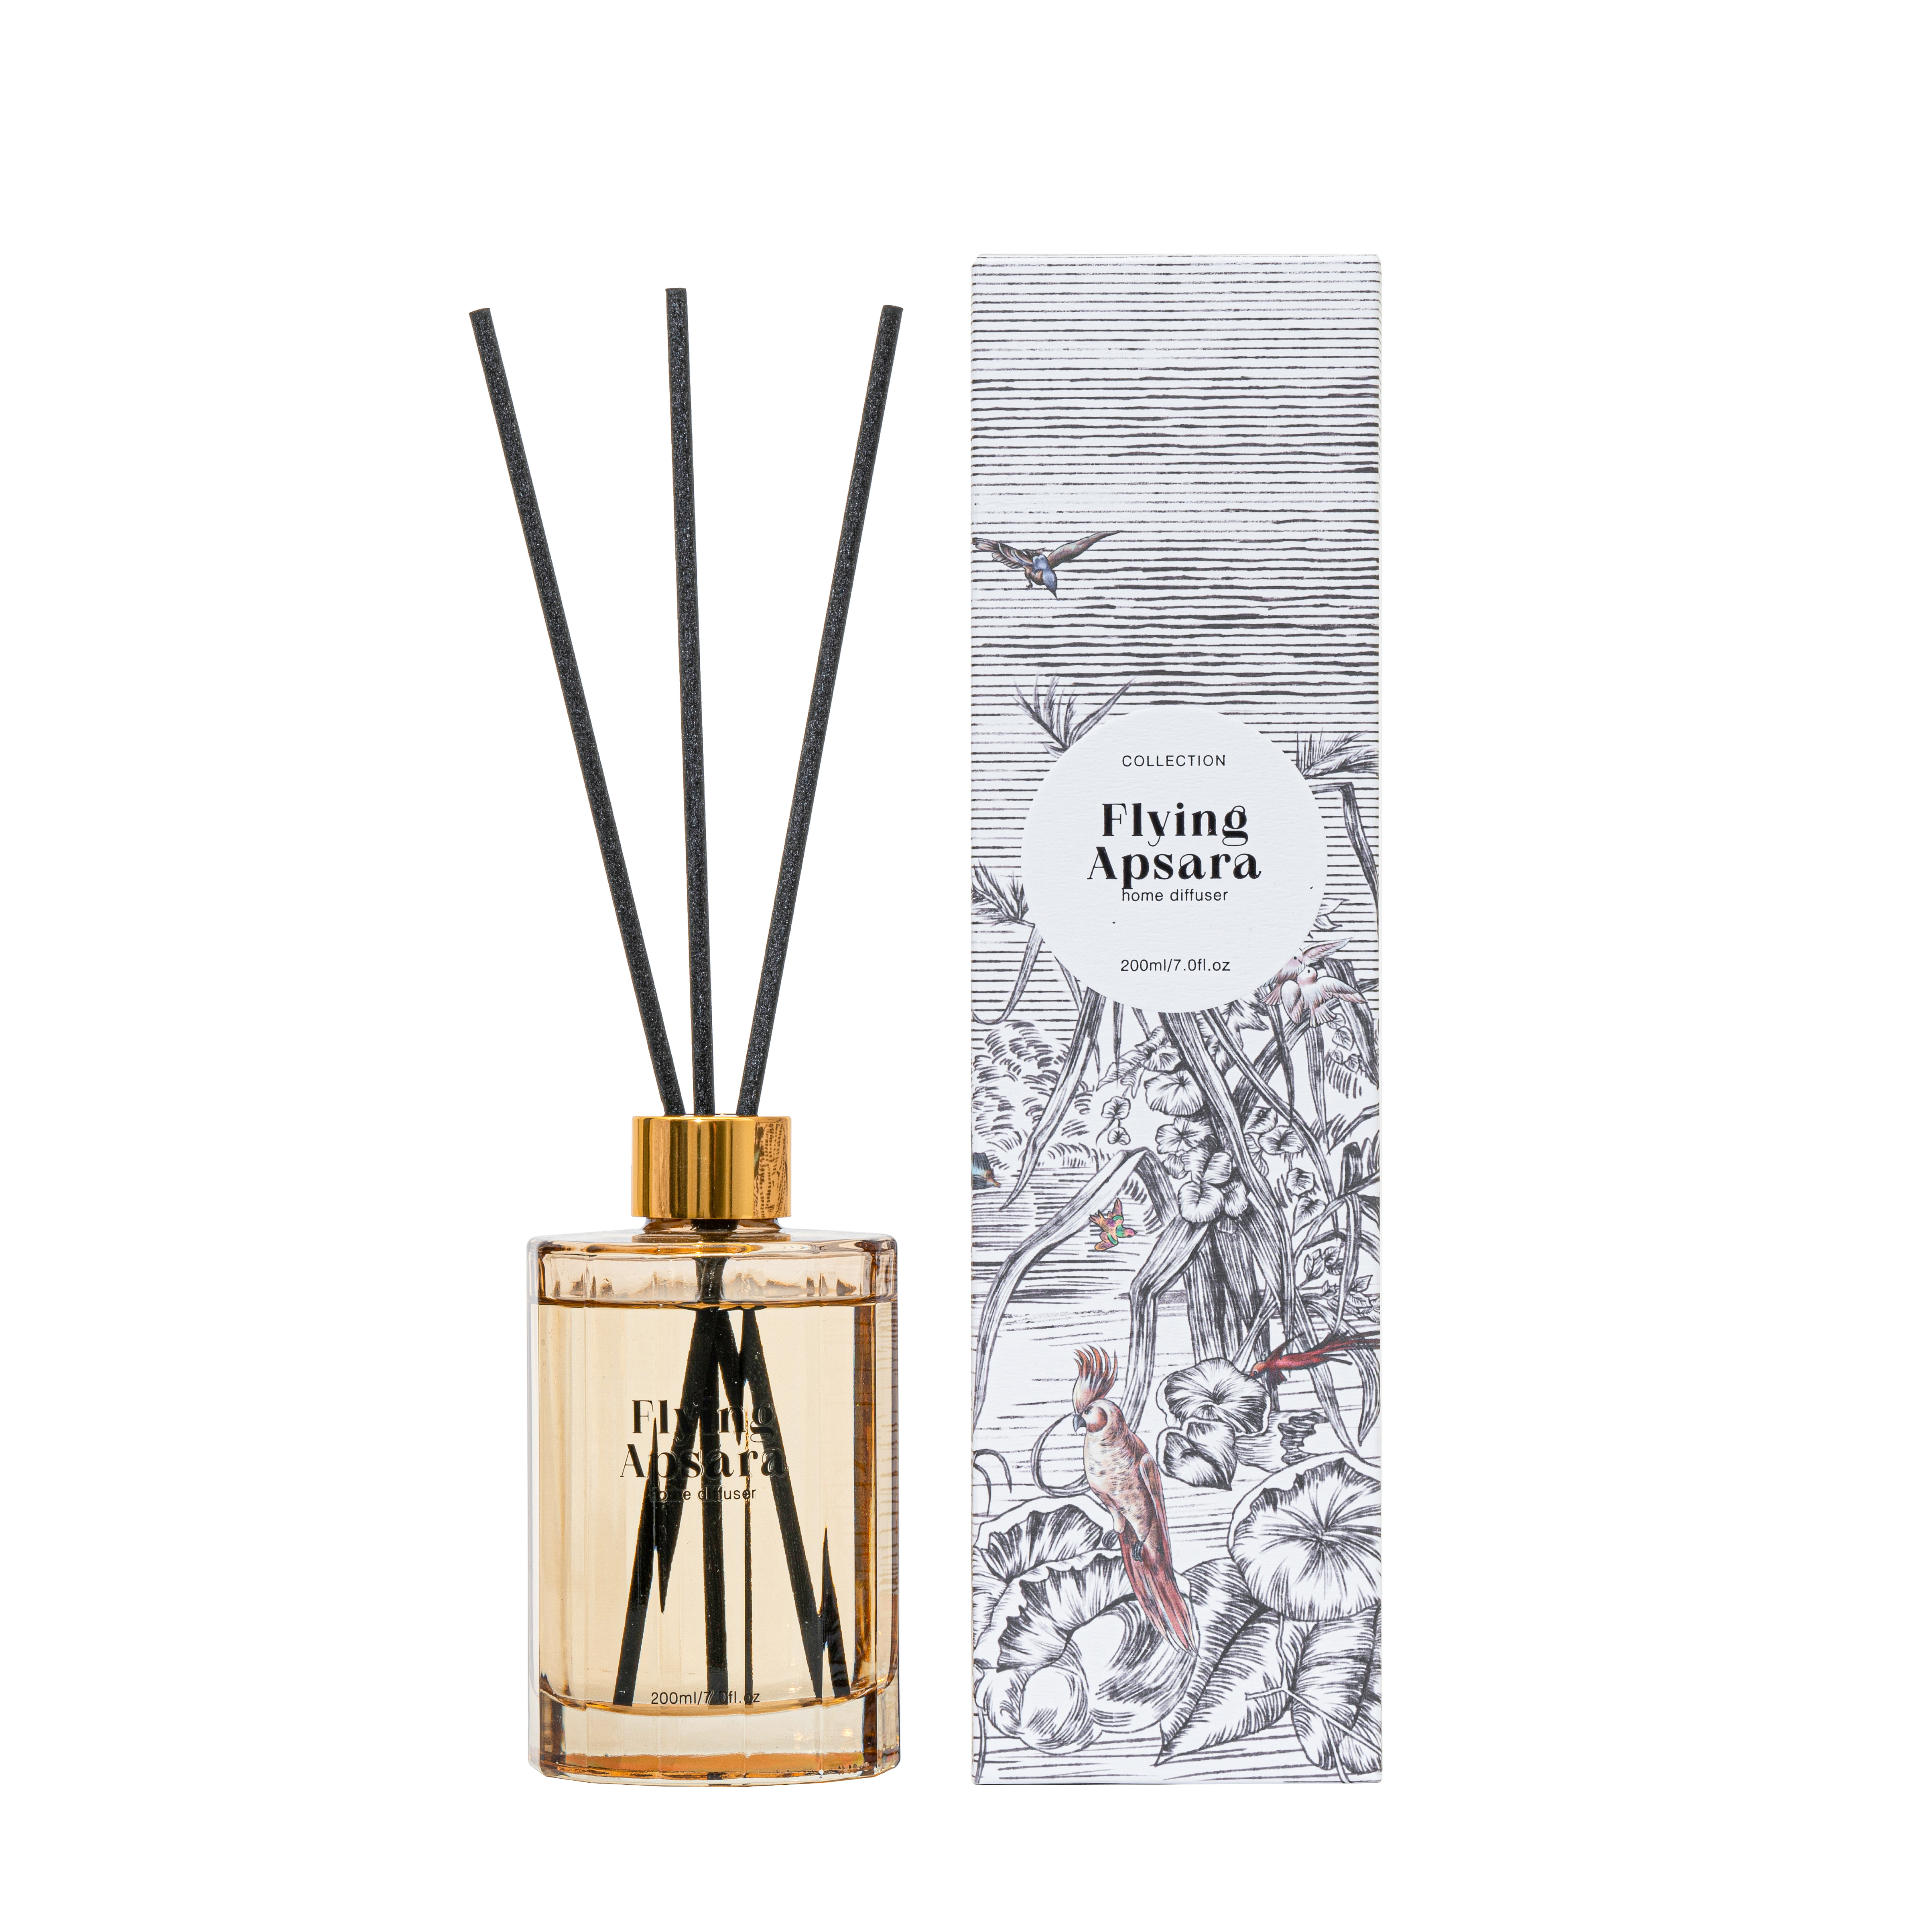 WOODWICK IS ON Collection Flying Apsara Yellow Reed Diffuser 200ml 